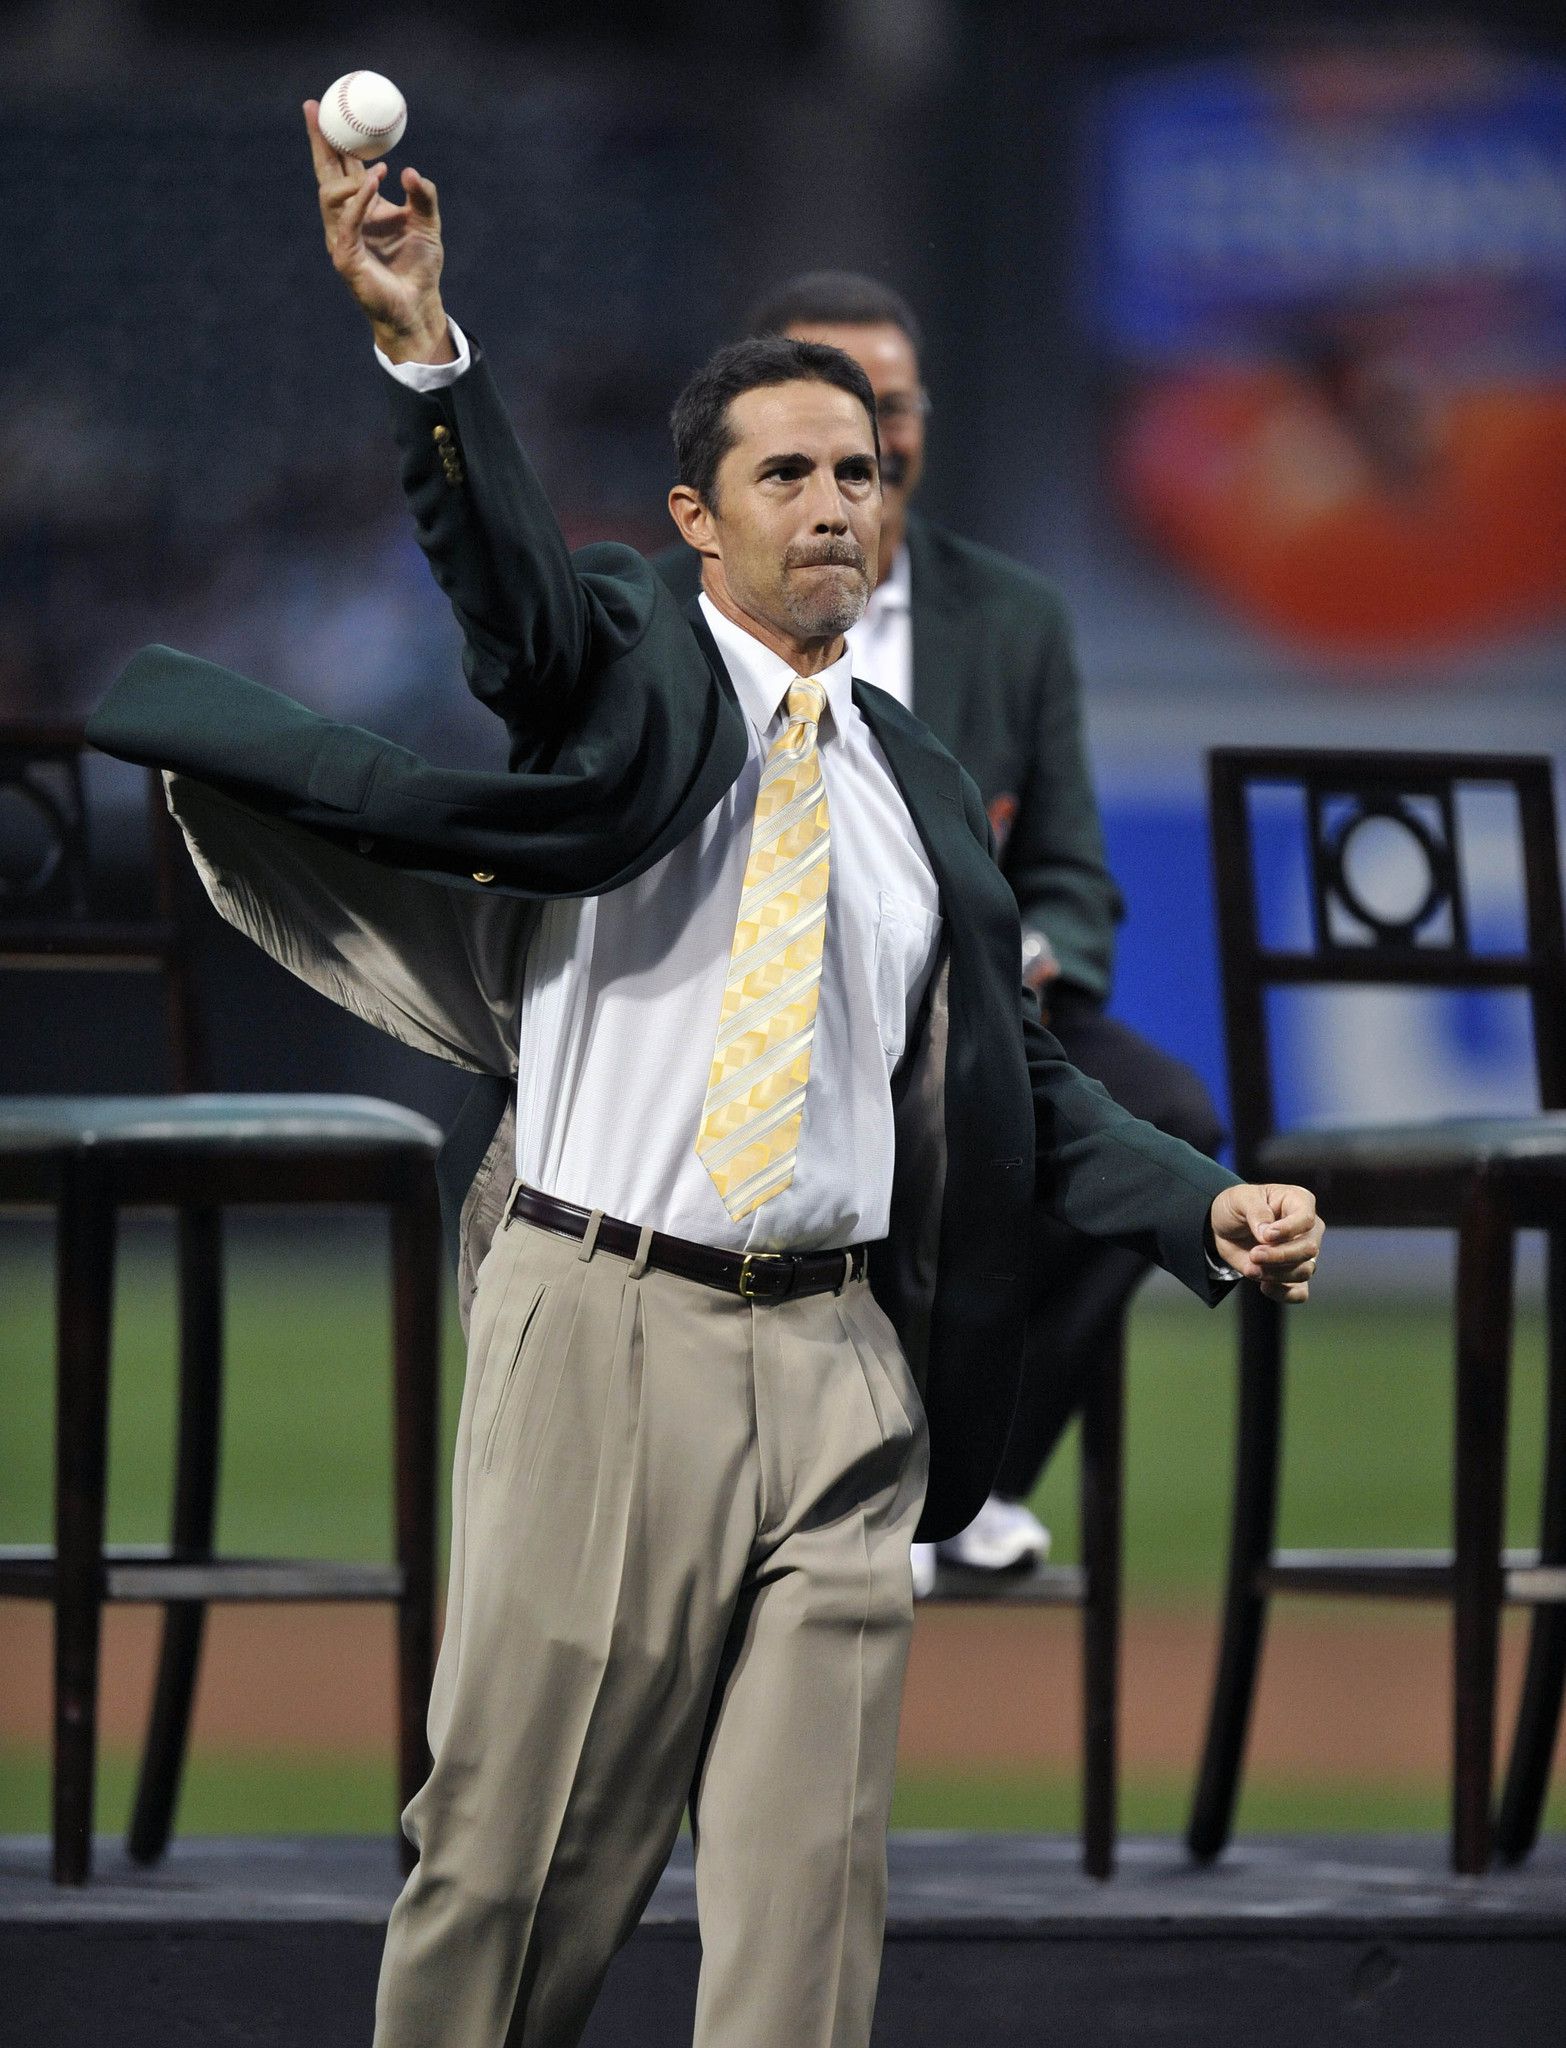 New York Yankees on X: Today we celebrated Mike Mussina's Hall of